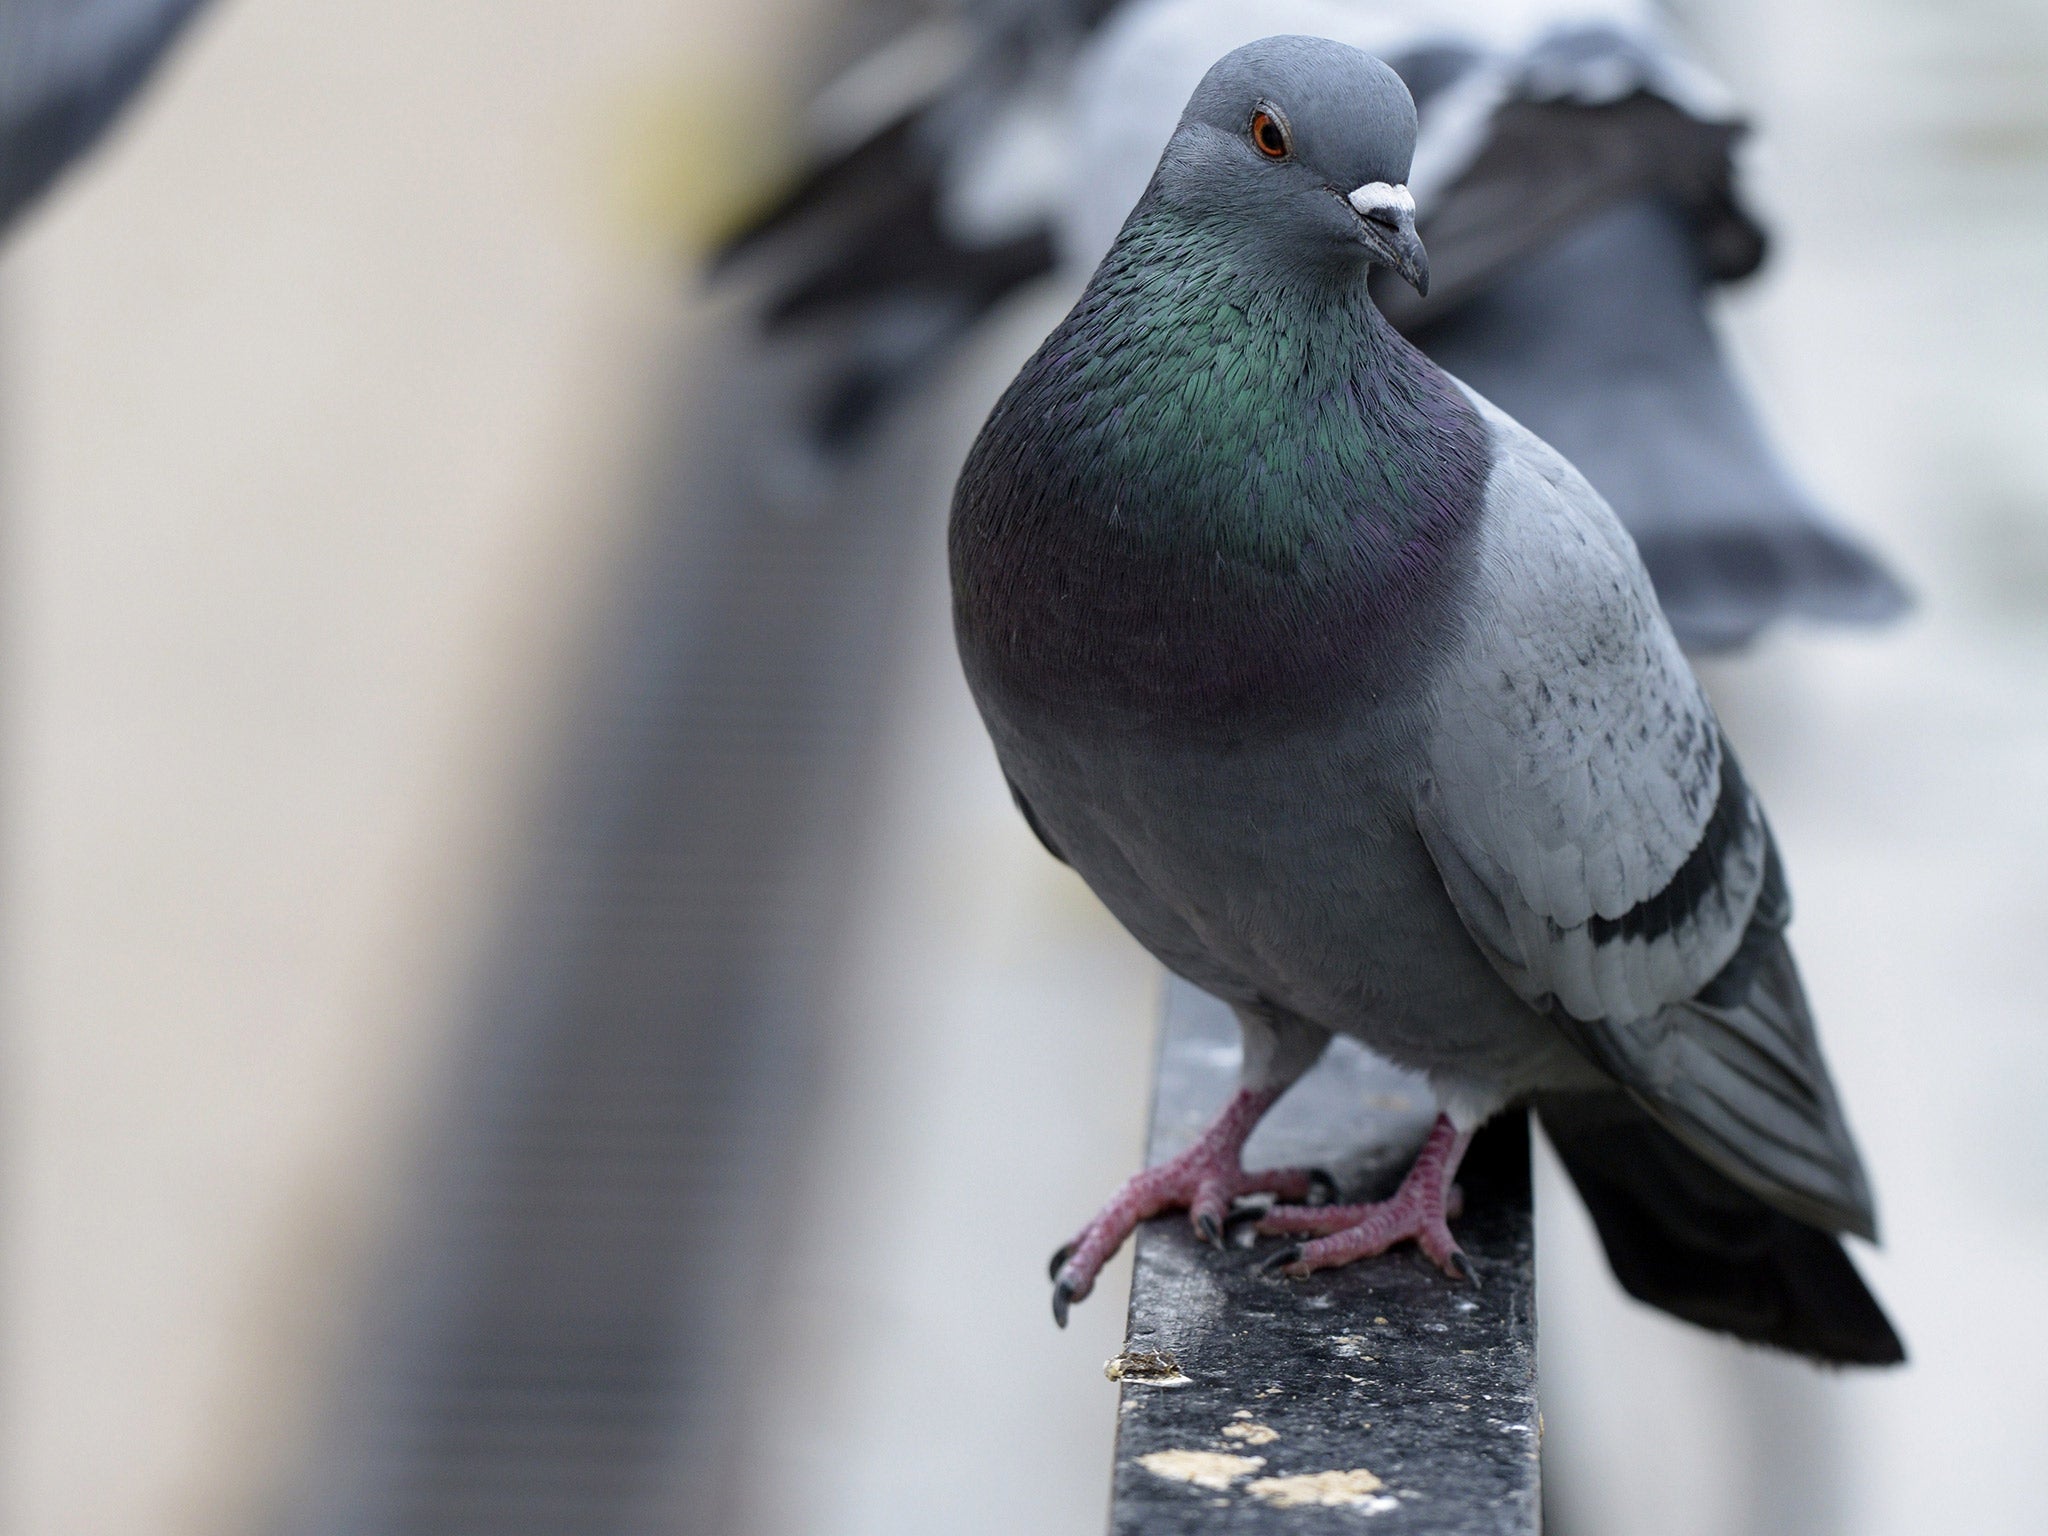 Officials estimate the pigeon population will fall by up to 80 per cent within five years. File photo